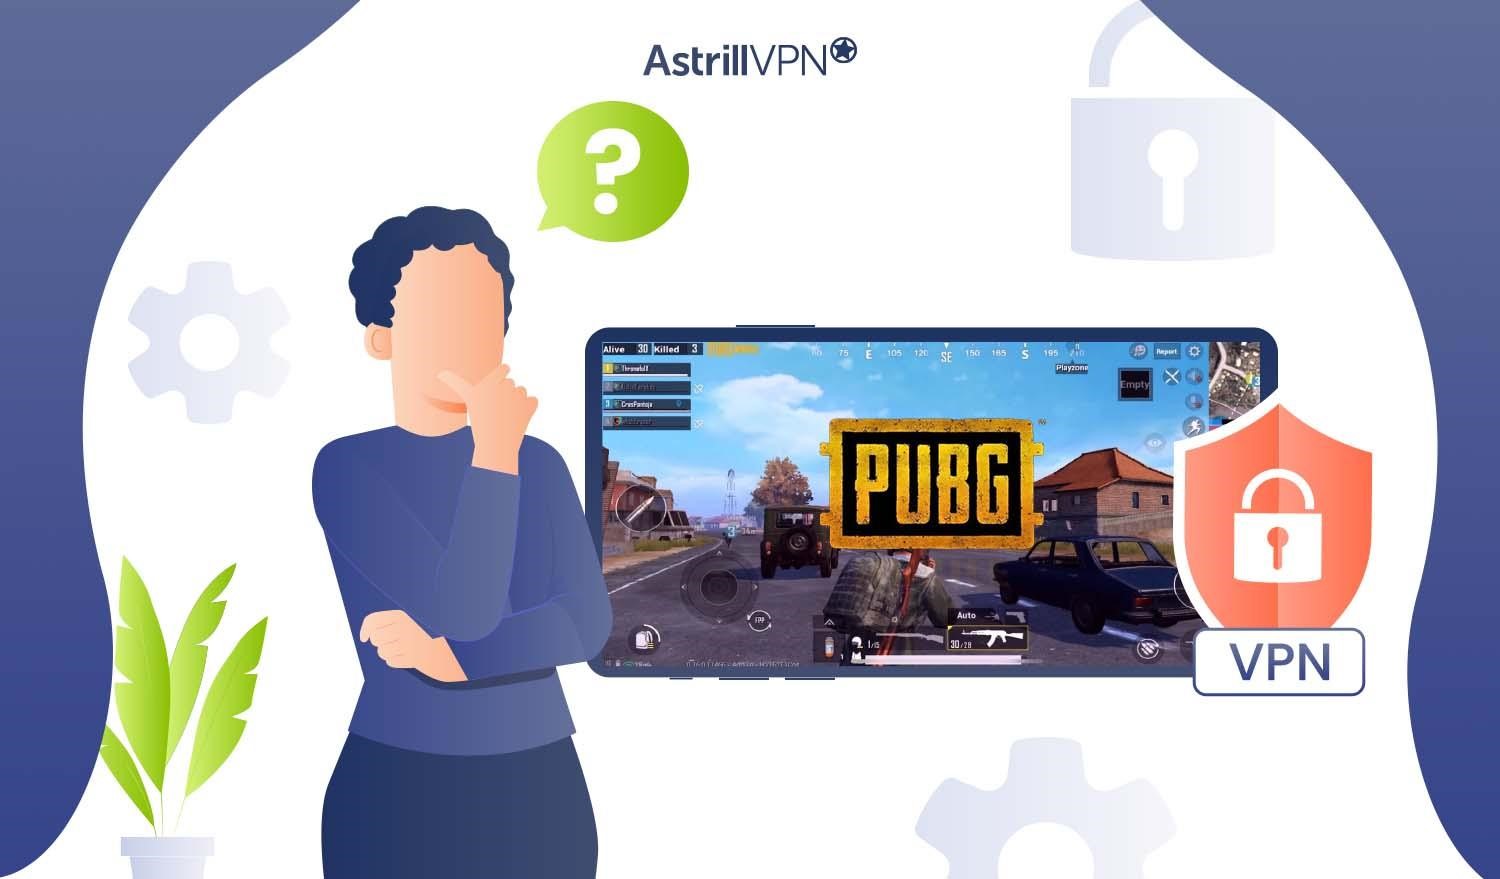 Why do You need a VPN for PUBG